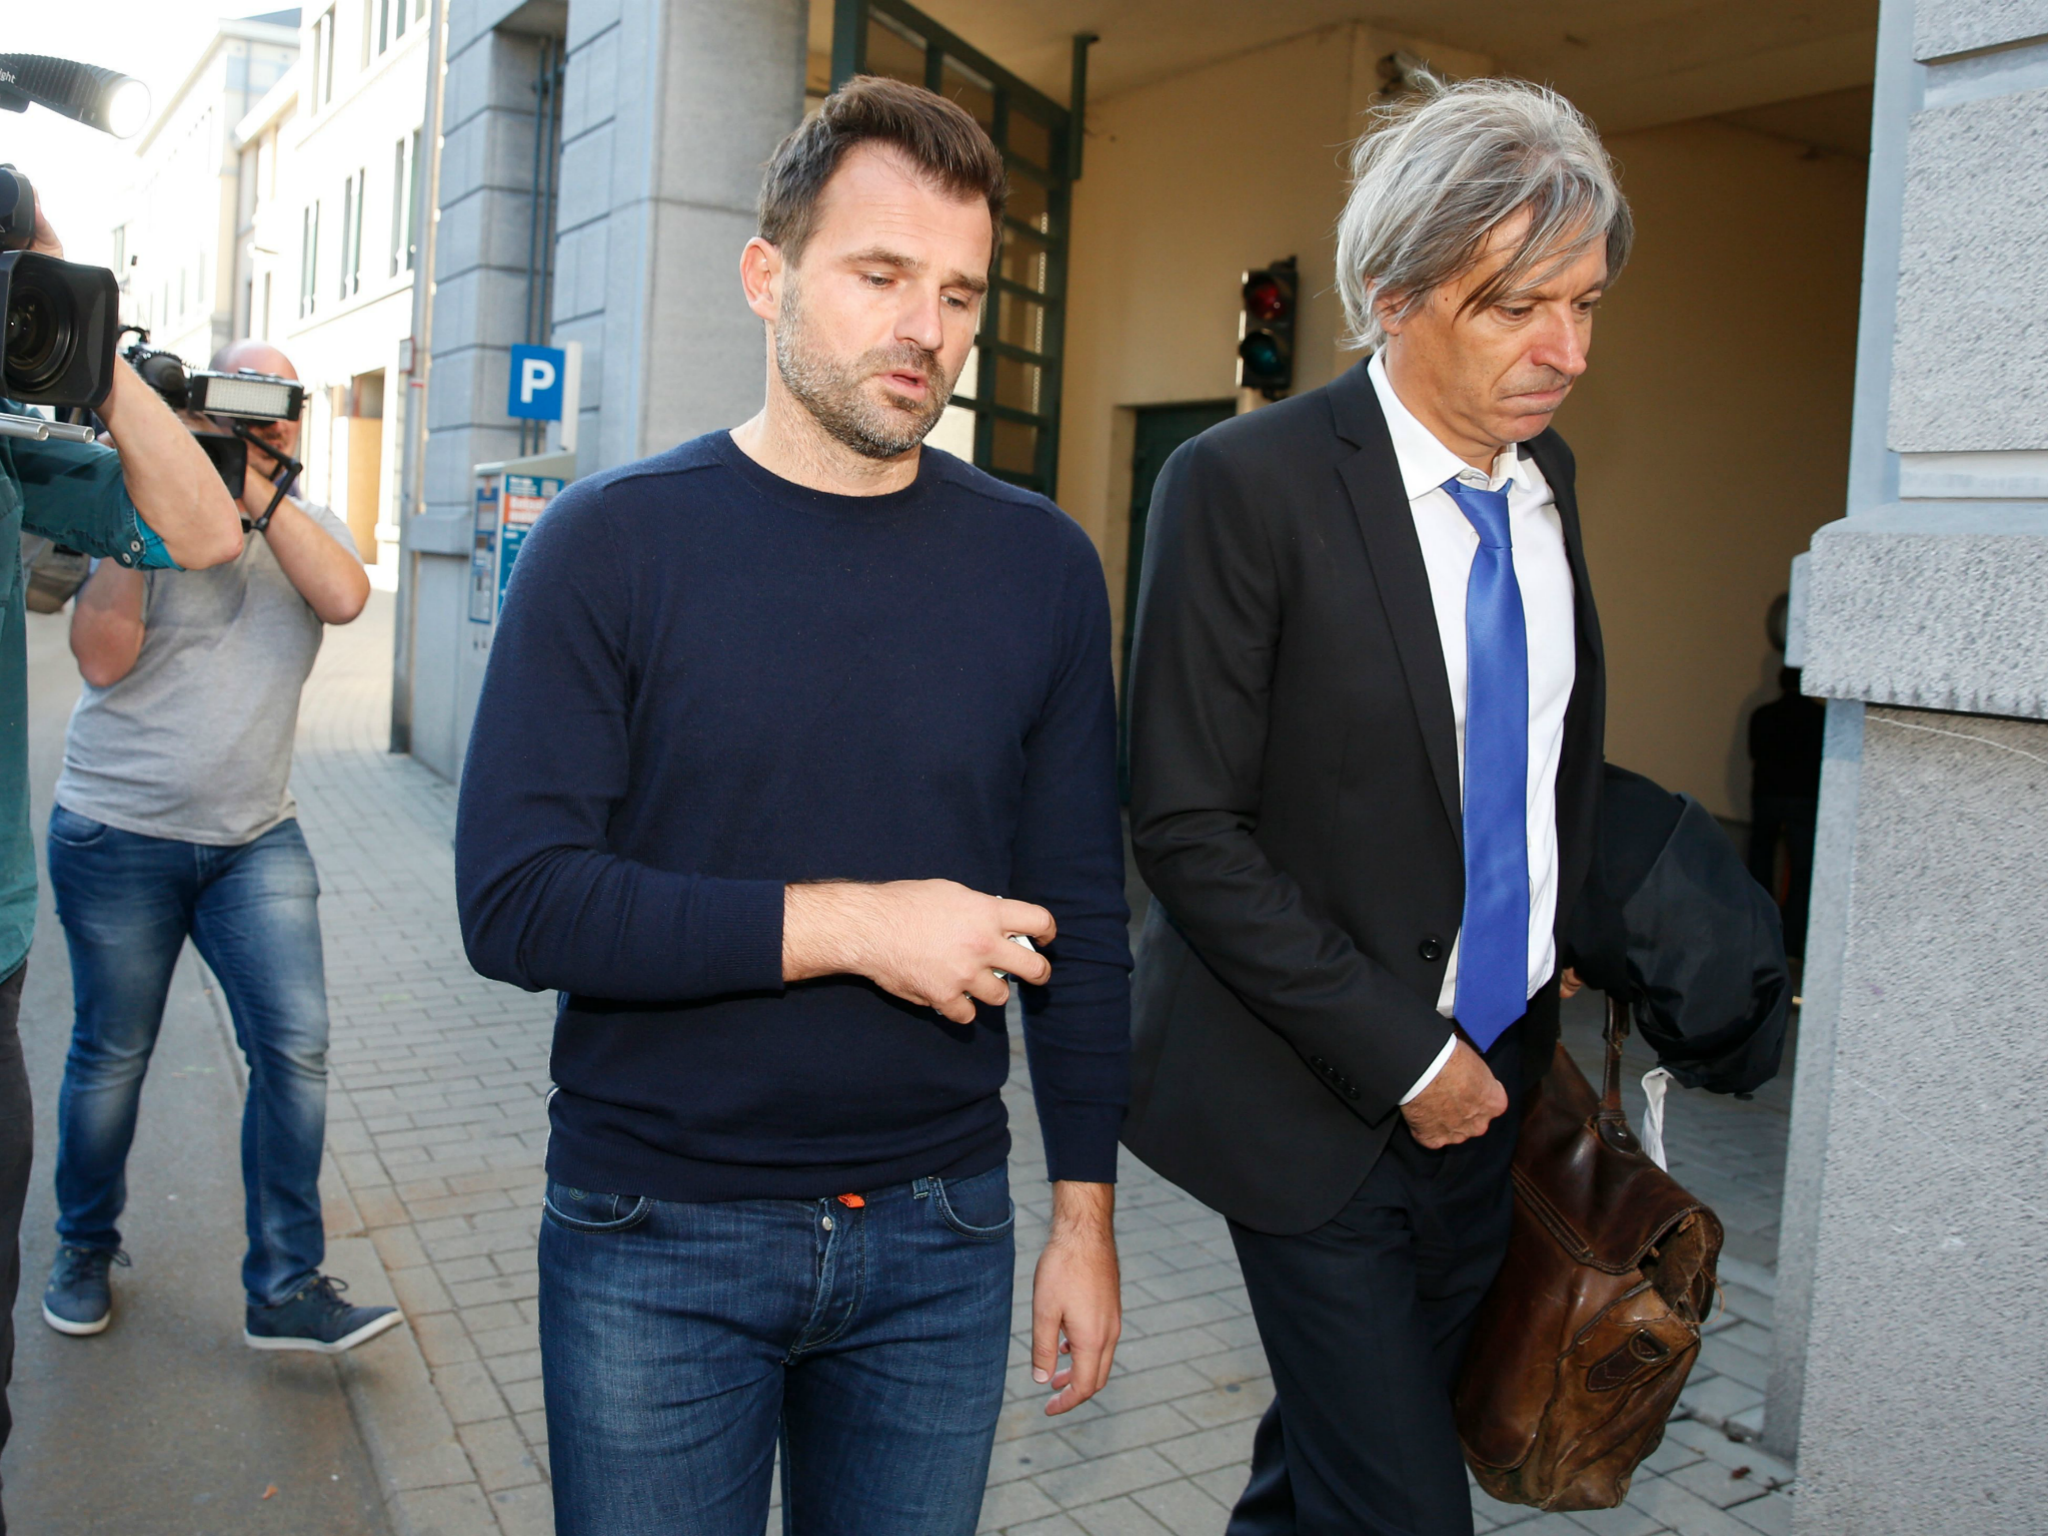 Club Brugge coach Leko is among 19 suspects who have been charged